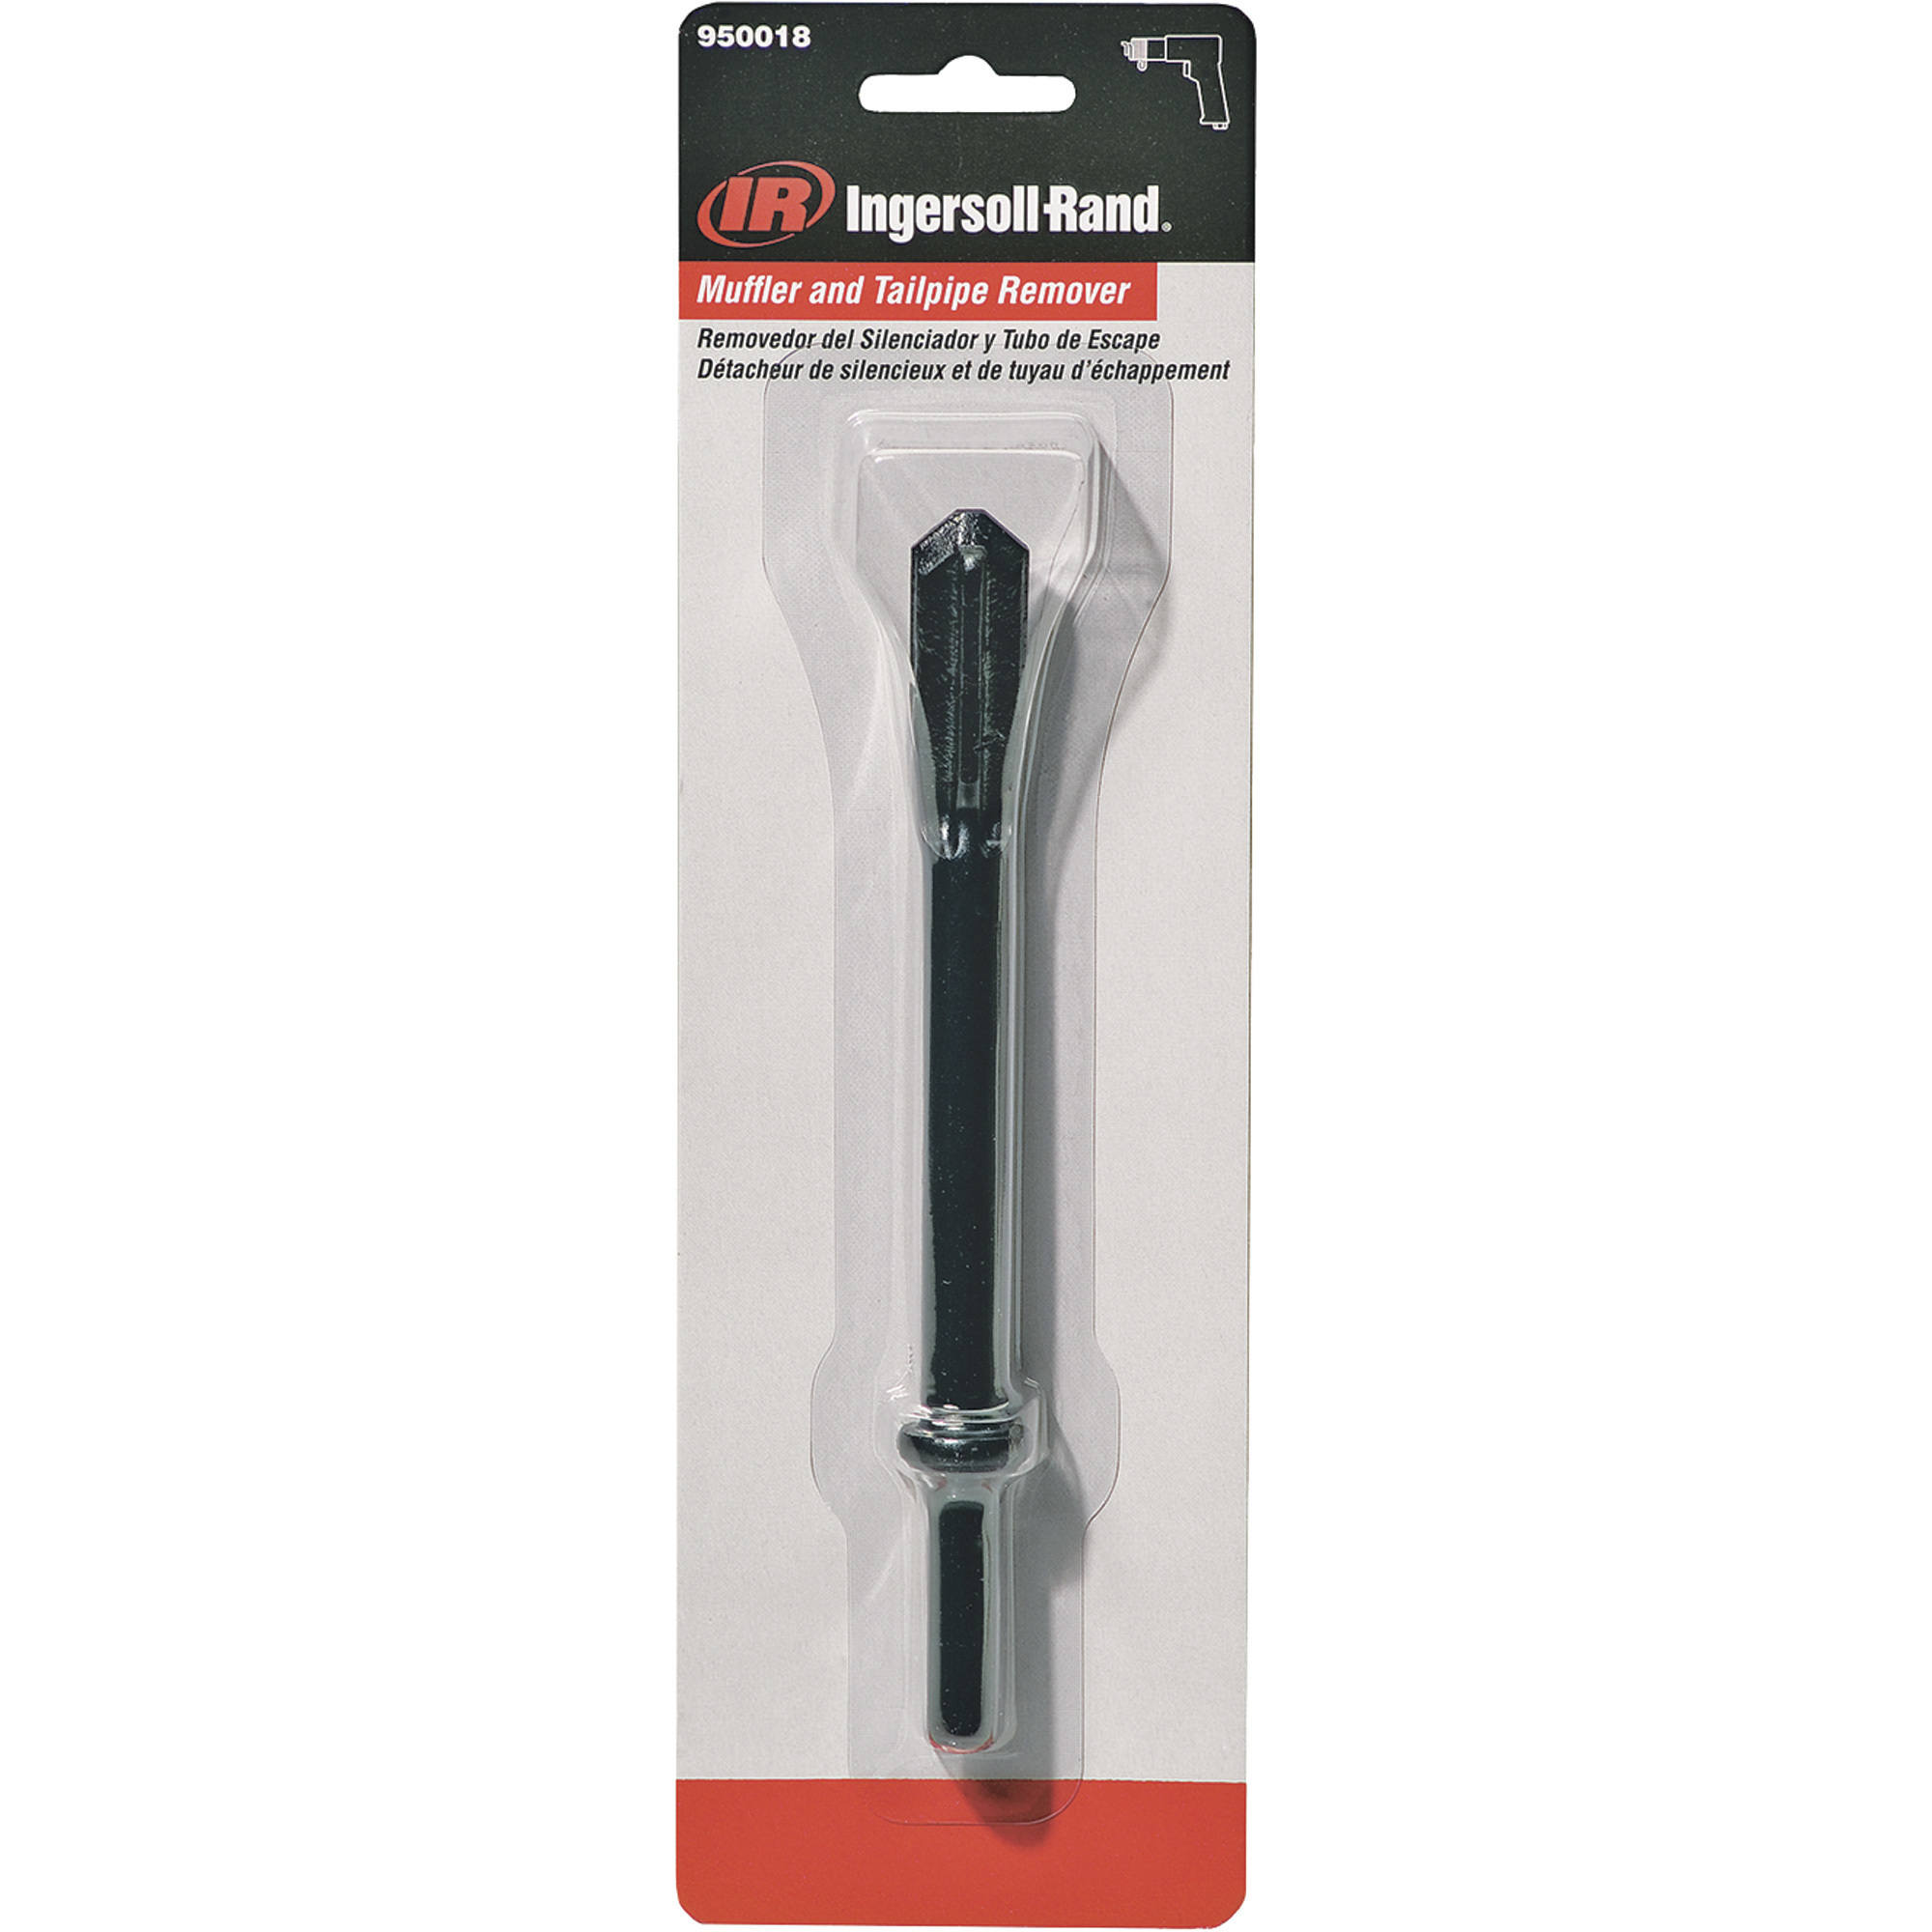 Ingersoll Rand Muffler and Tailpipe Remover